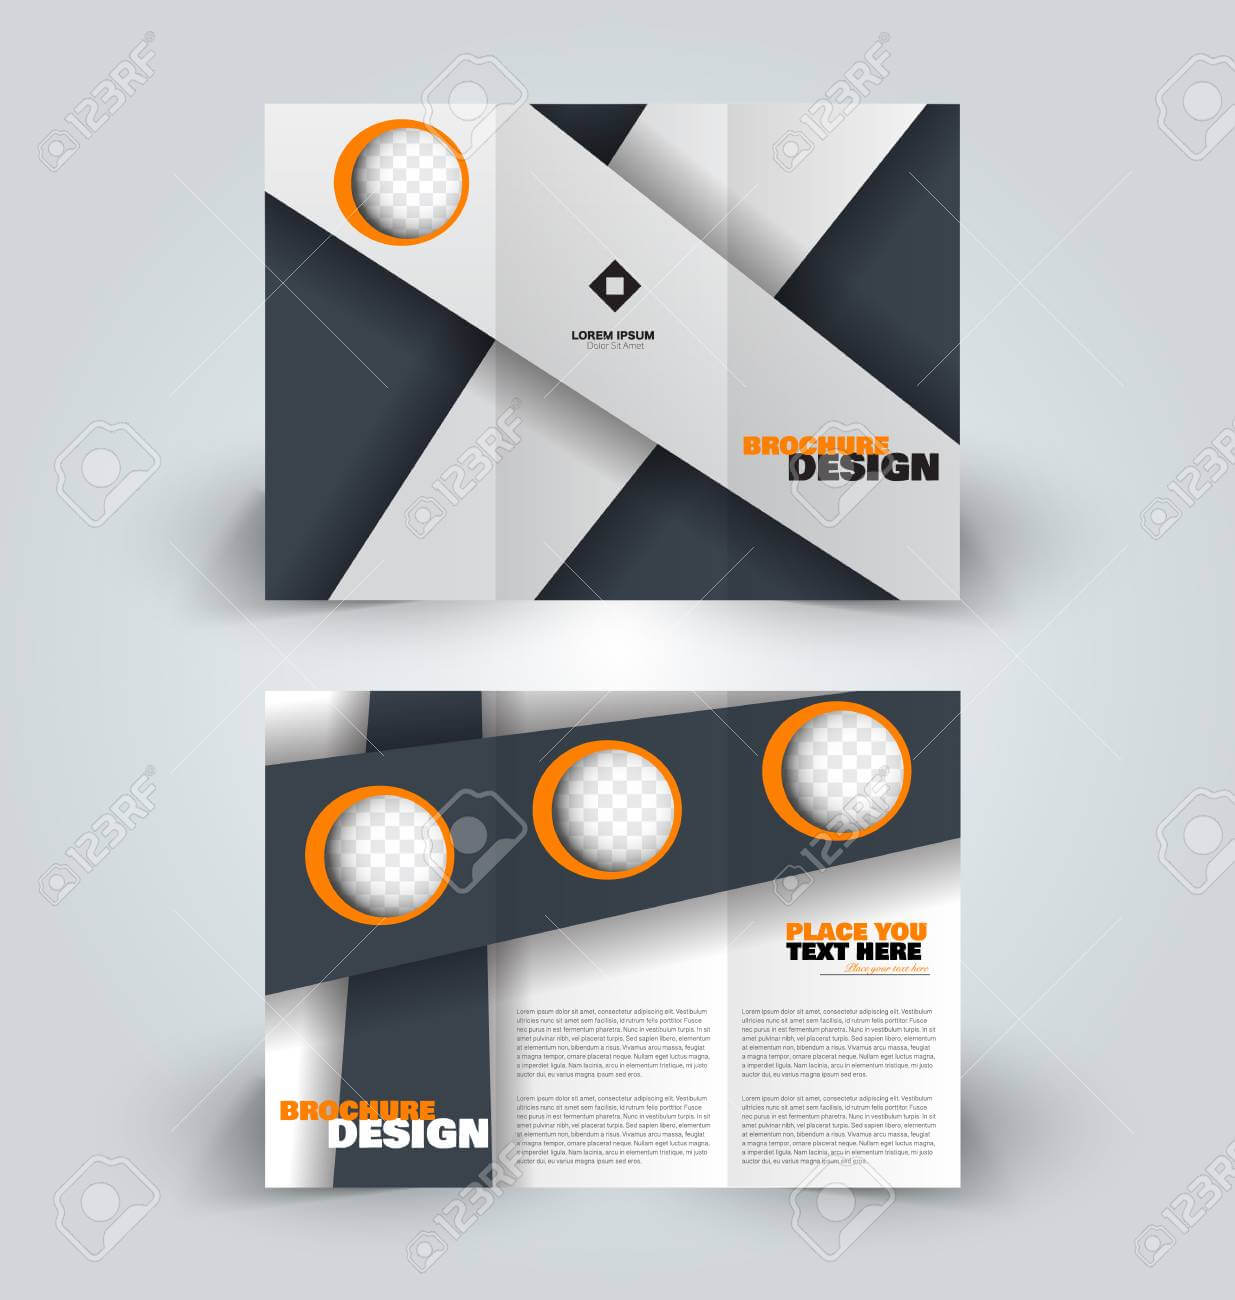 Brochure Template. Creative Design Trend For Professional Corporate.. With Professional Brochure Design Templates